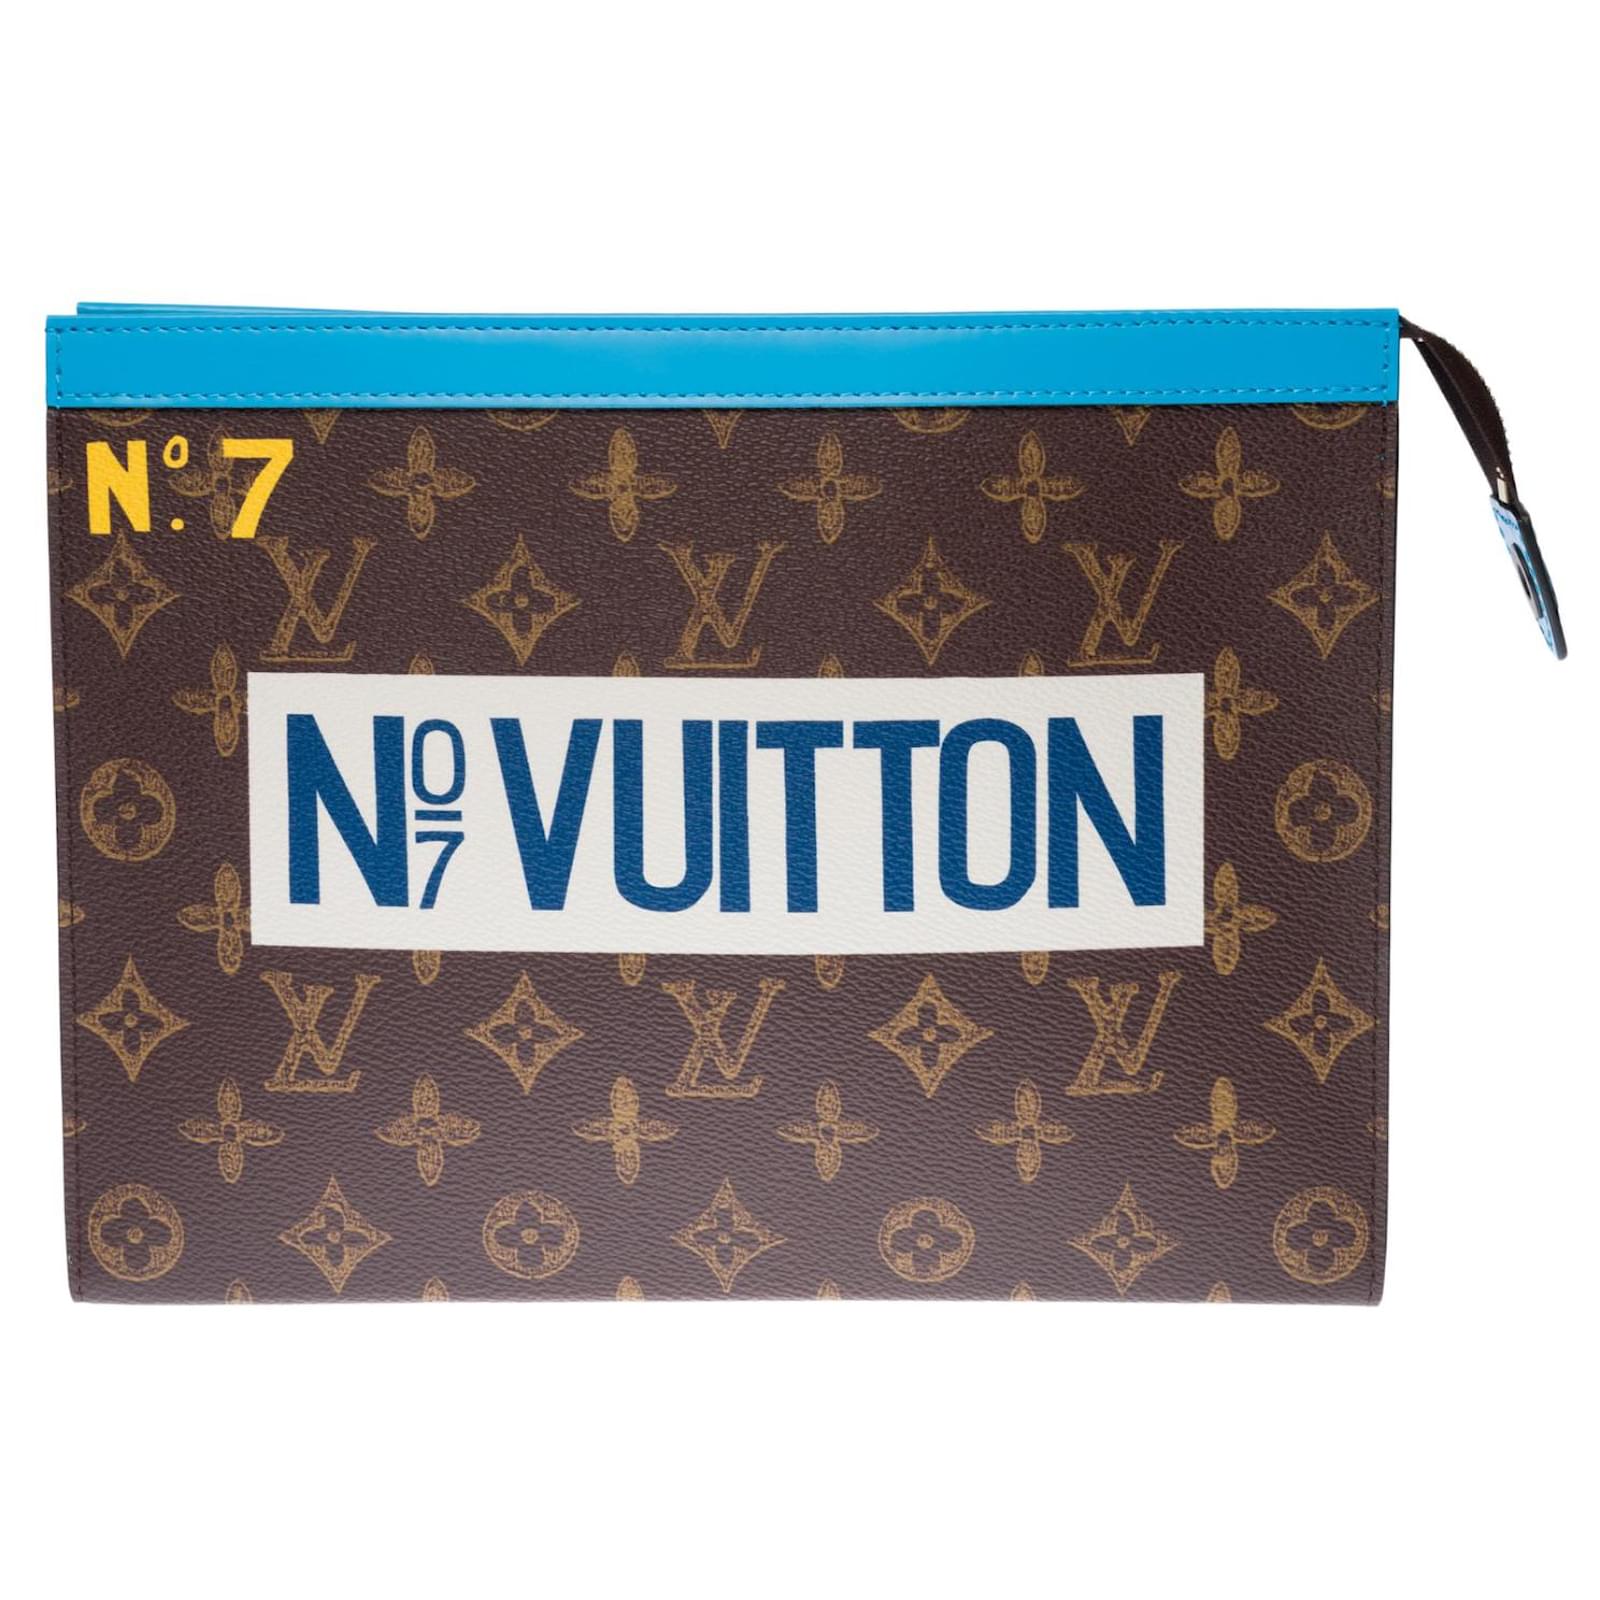 Clutch Box Monogram Eclipse - Trunks and Travel